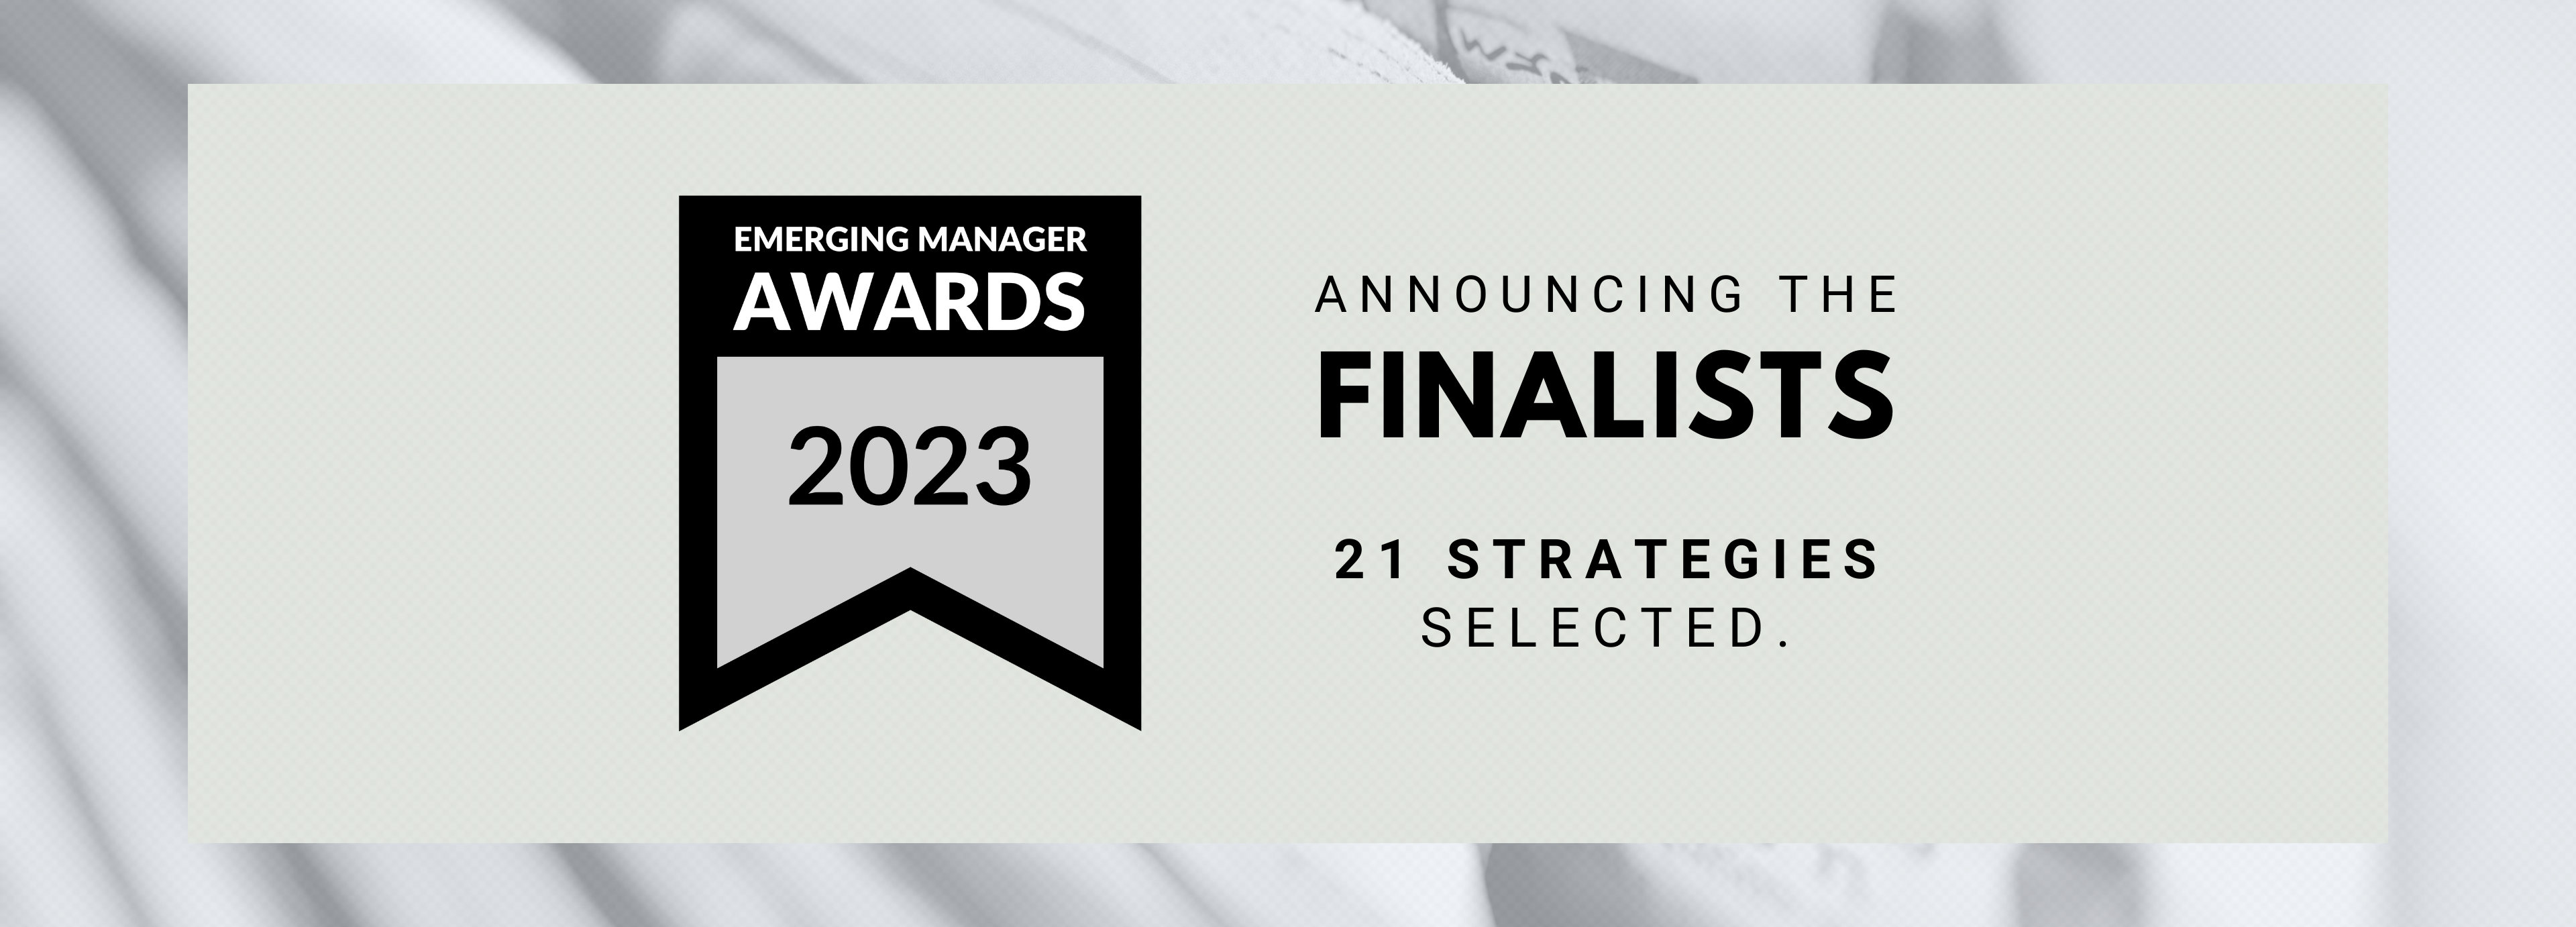 2023 Emerging Manager Awards Finalists Announced